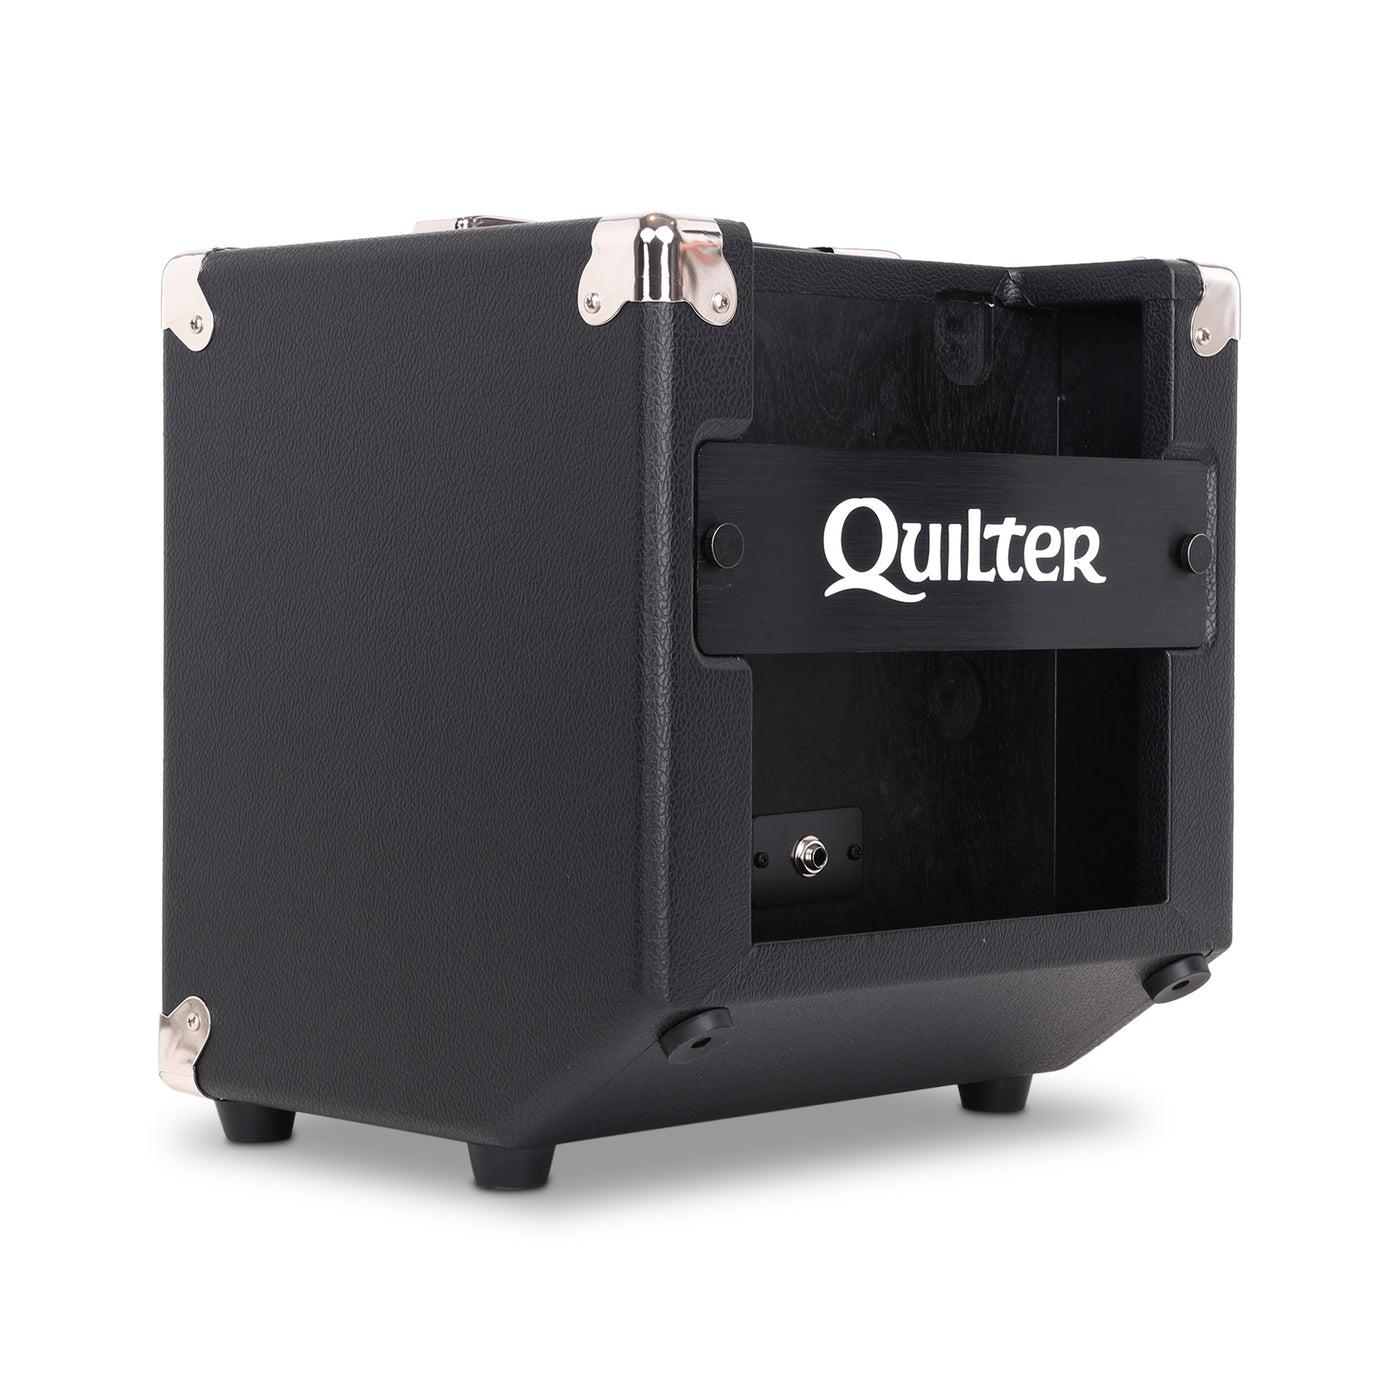 Quilter Labs BlockDock 10TC amplifier cabinet - facing away diagonally to the left